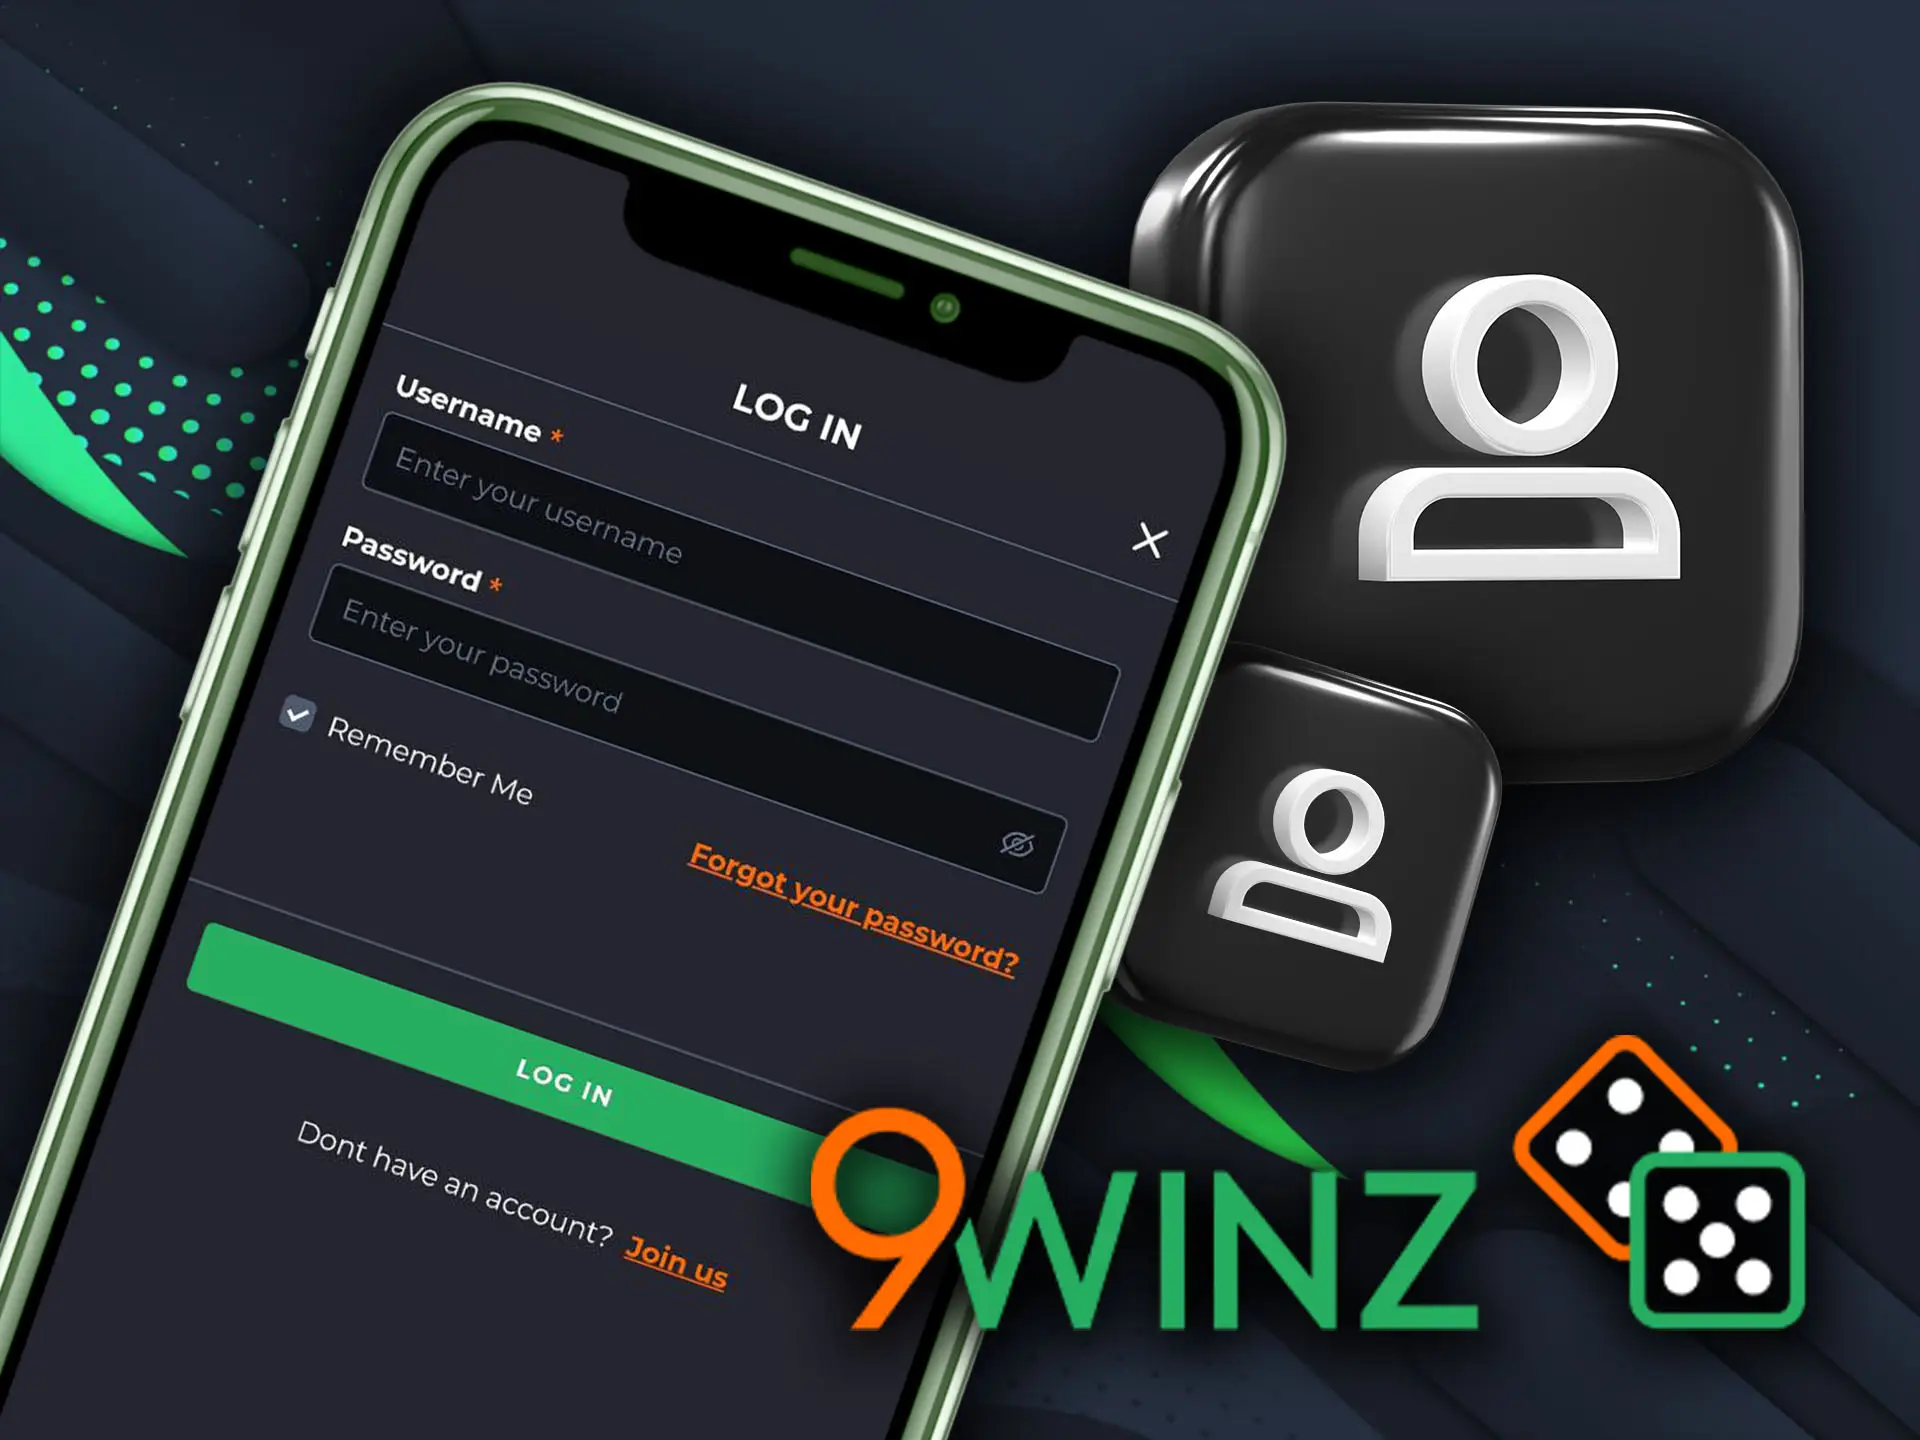 Use your 9winz account for logging in mobile version.